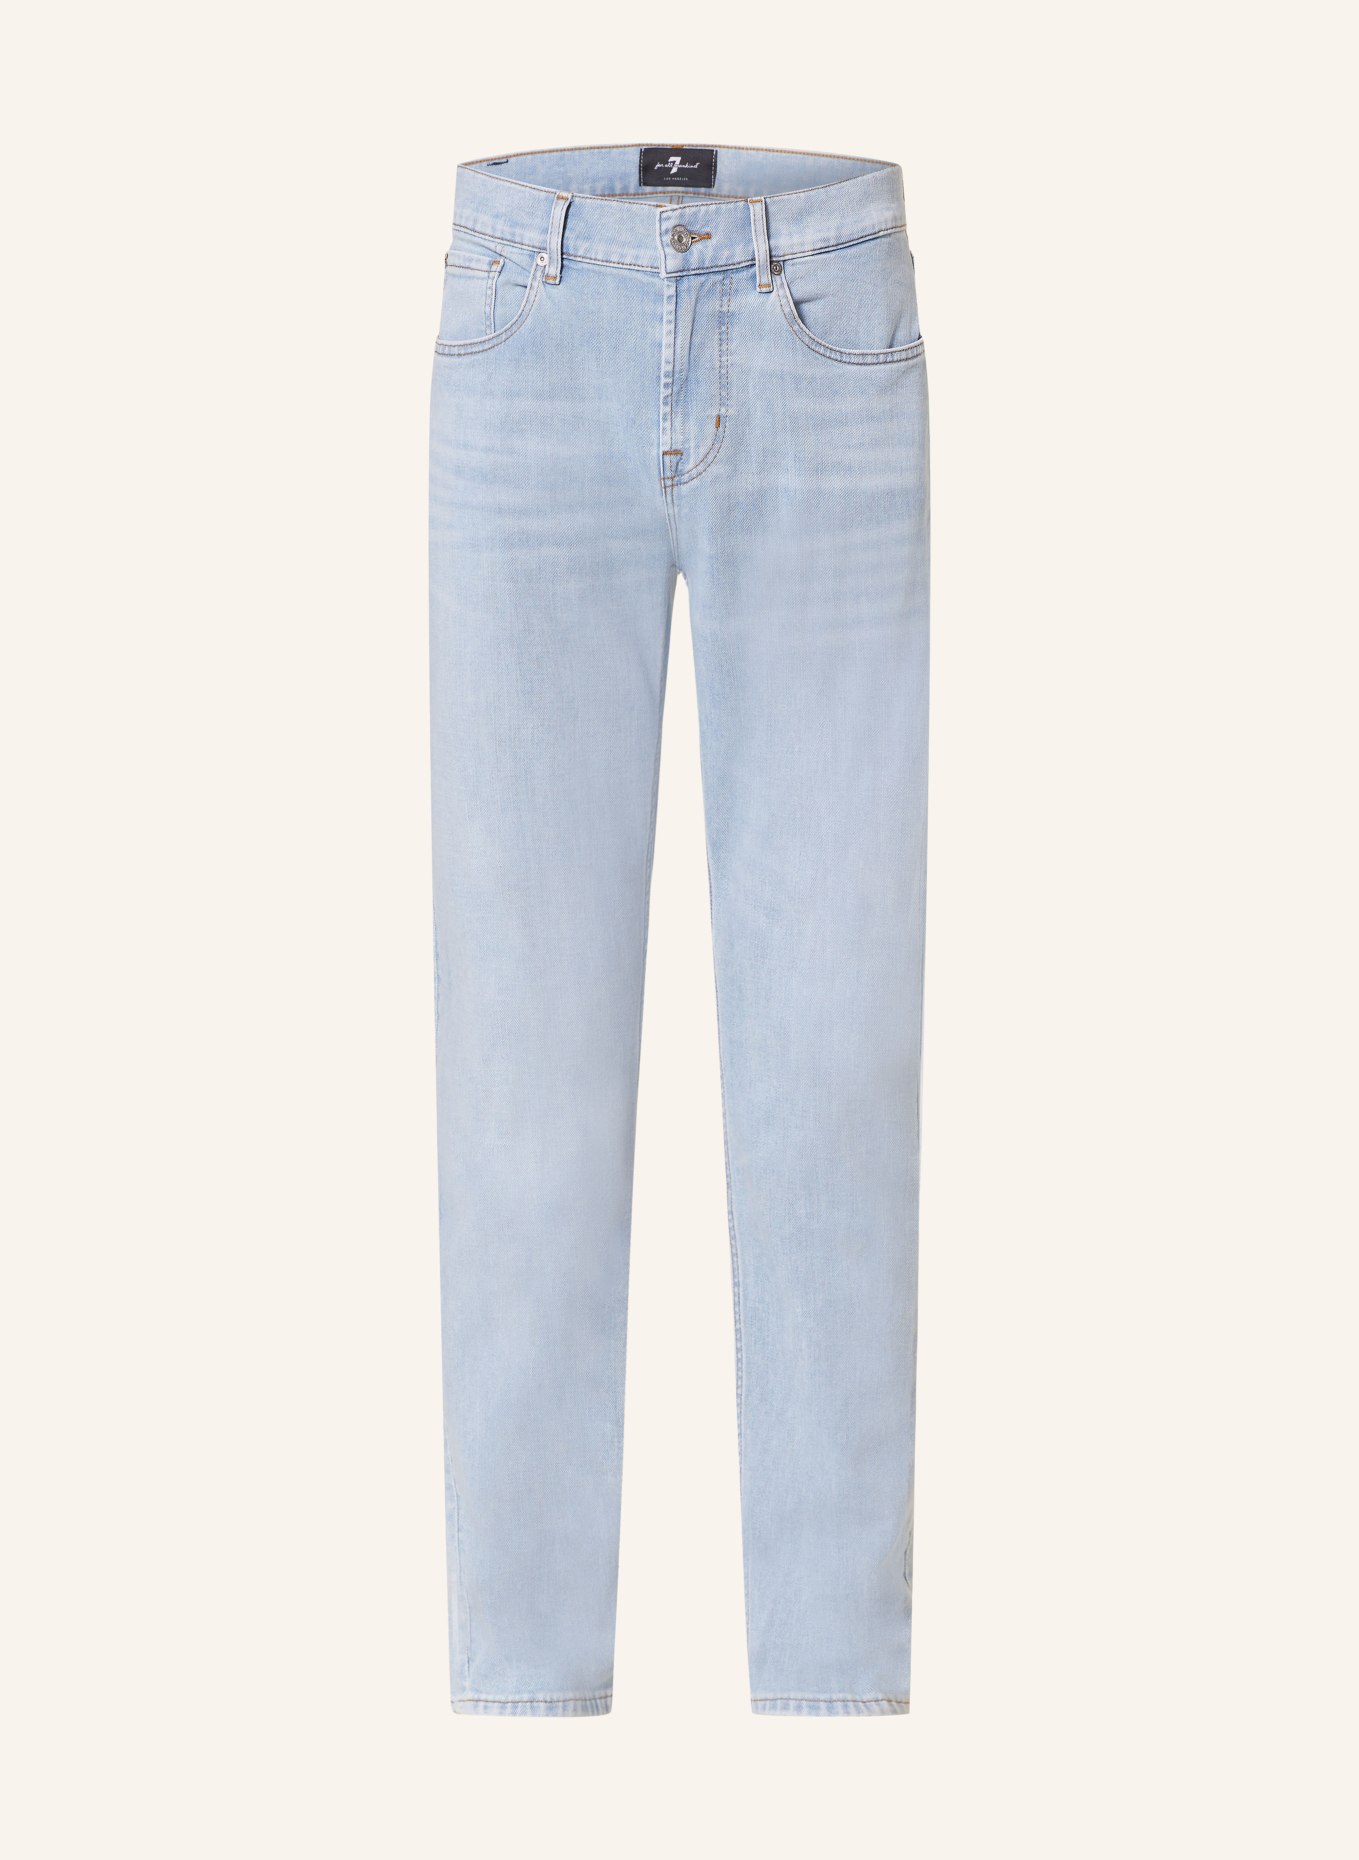 7 for all mankind Jeans Slimmy Tapered Fit, Farbe: LIGHT BLUE (Bild 1)